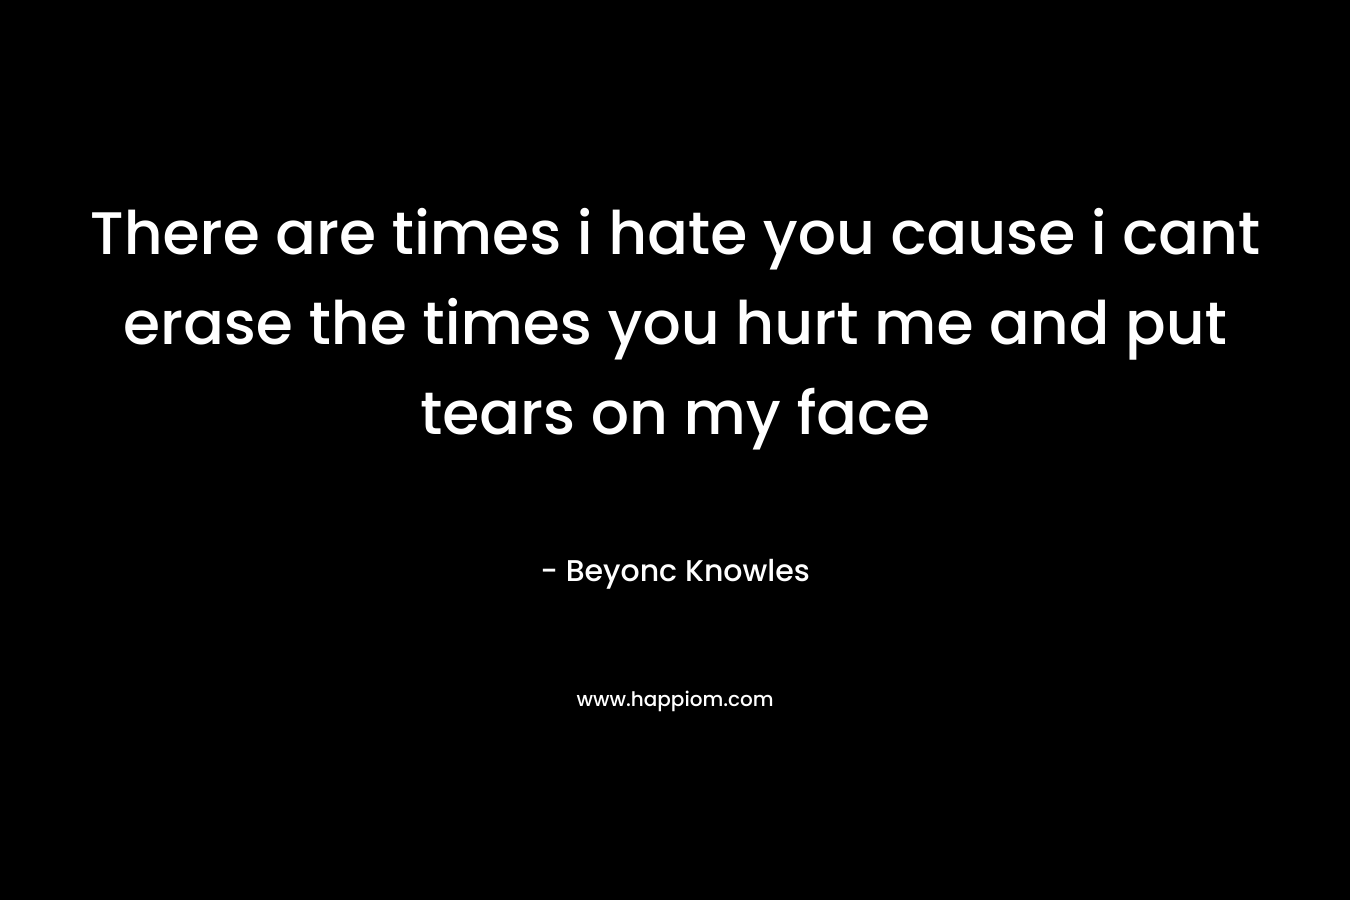 There are times i hate you cause i cant erase the times you hurt me and put tears on my face – Beyonc Knowles